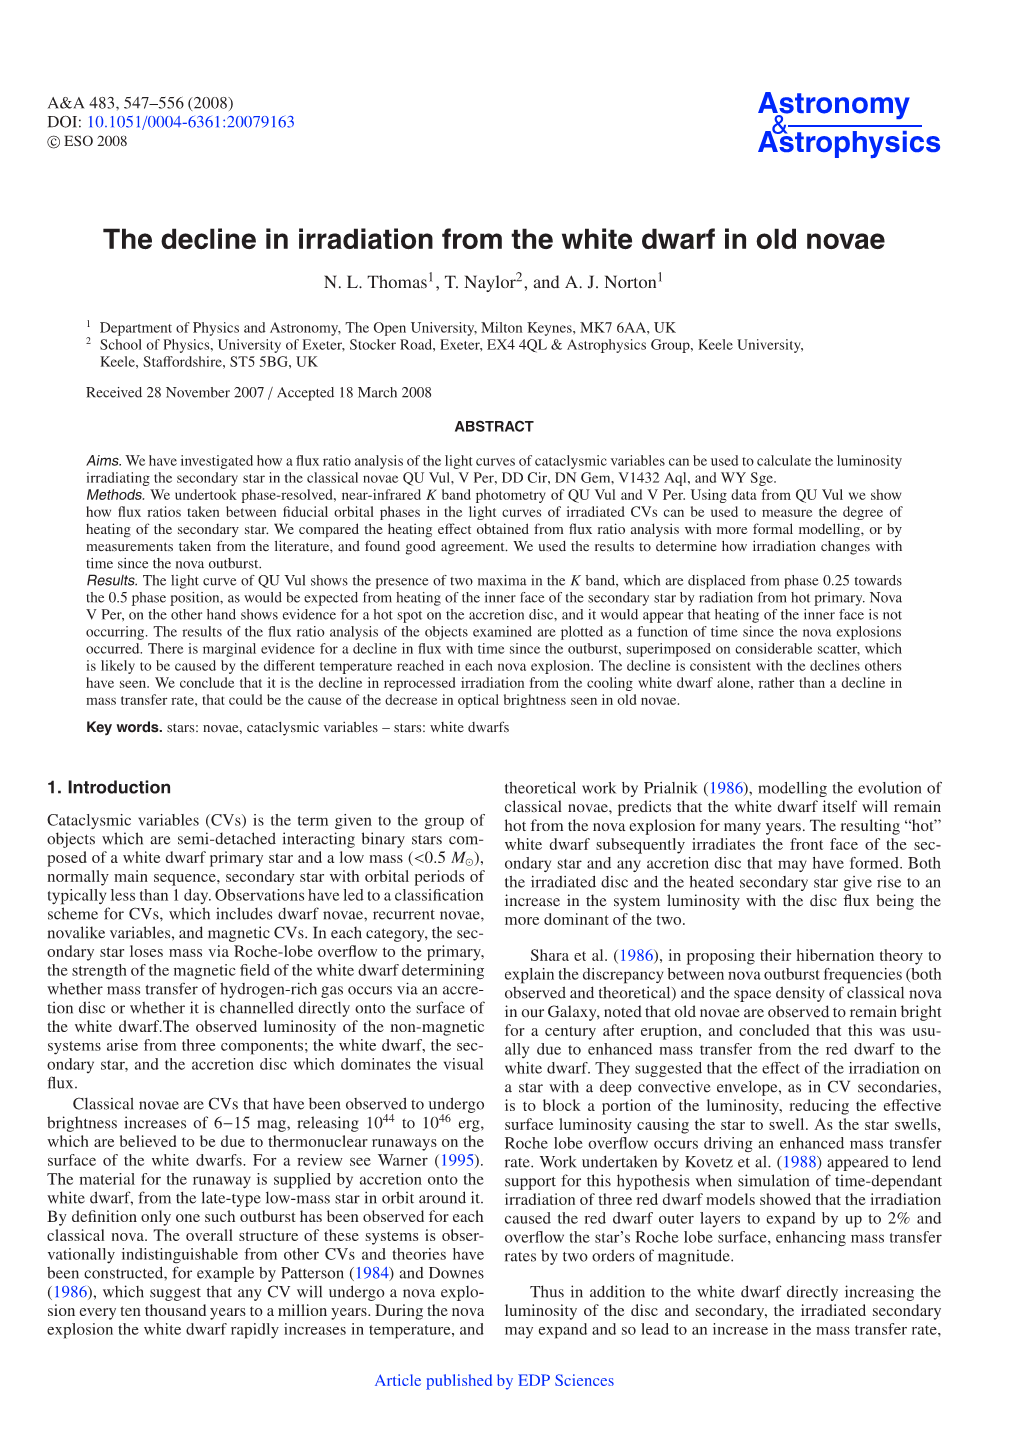 The Decline in Irradiation from the White Dwarf in Old Novae